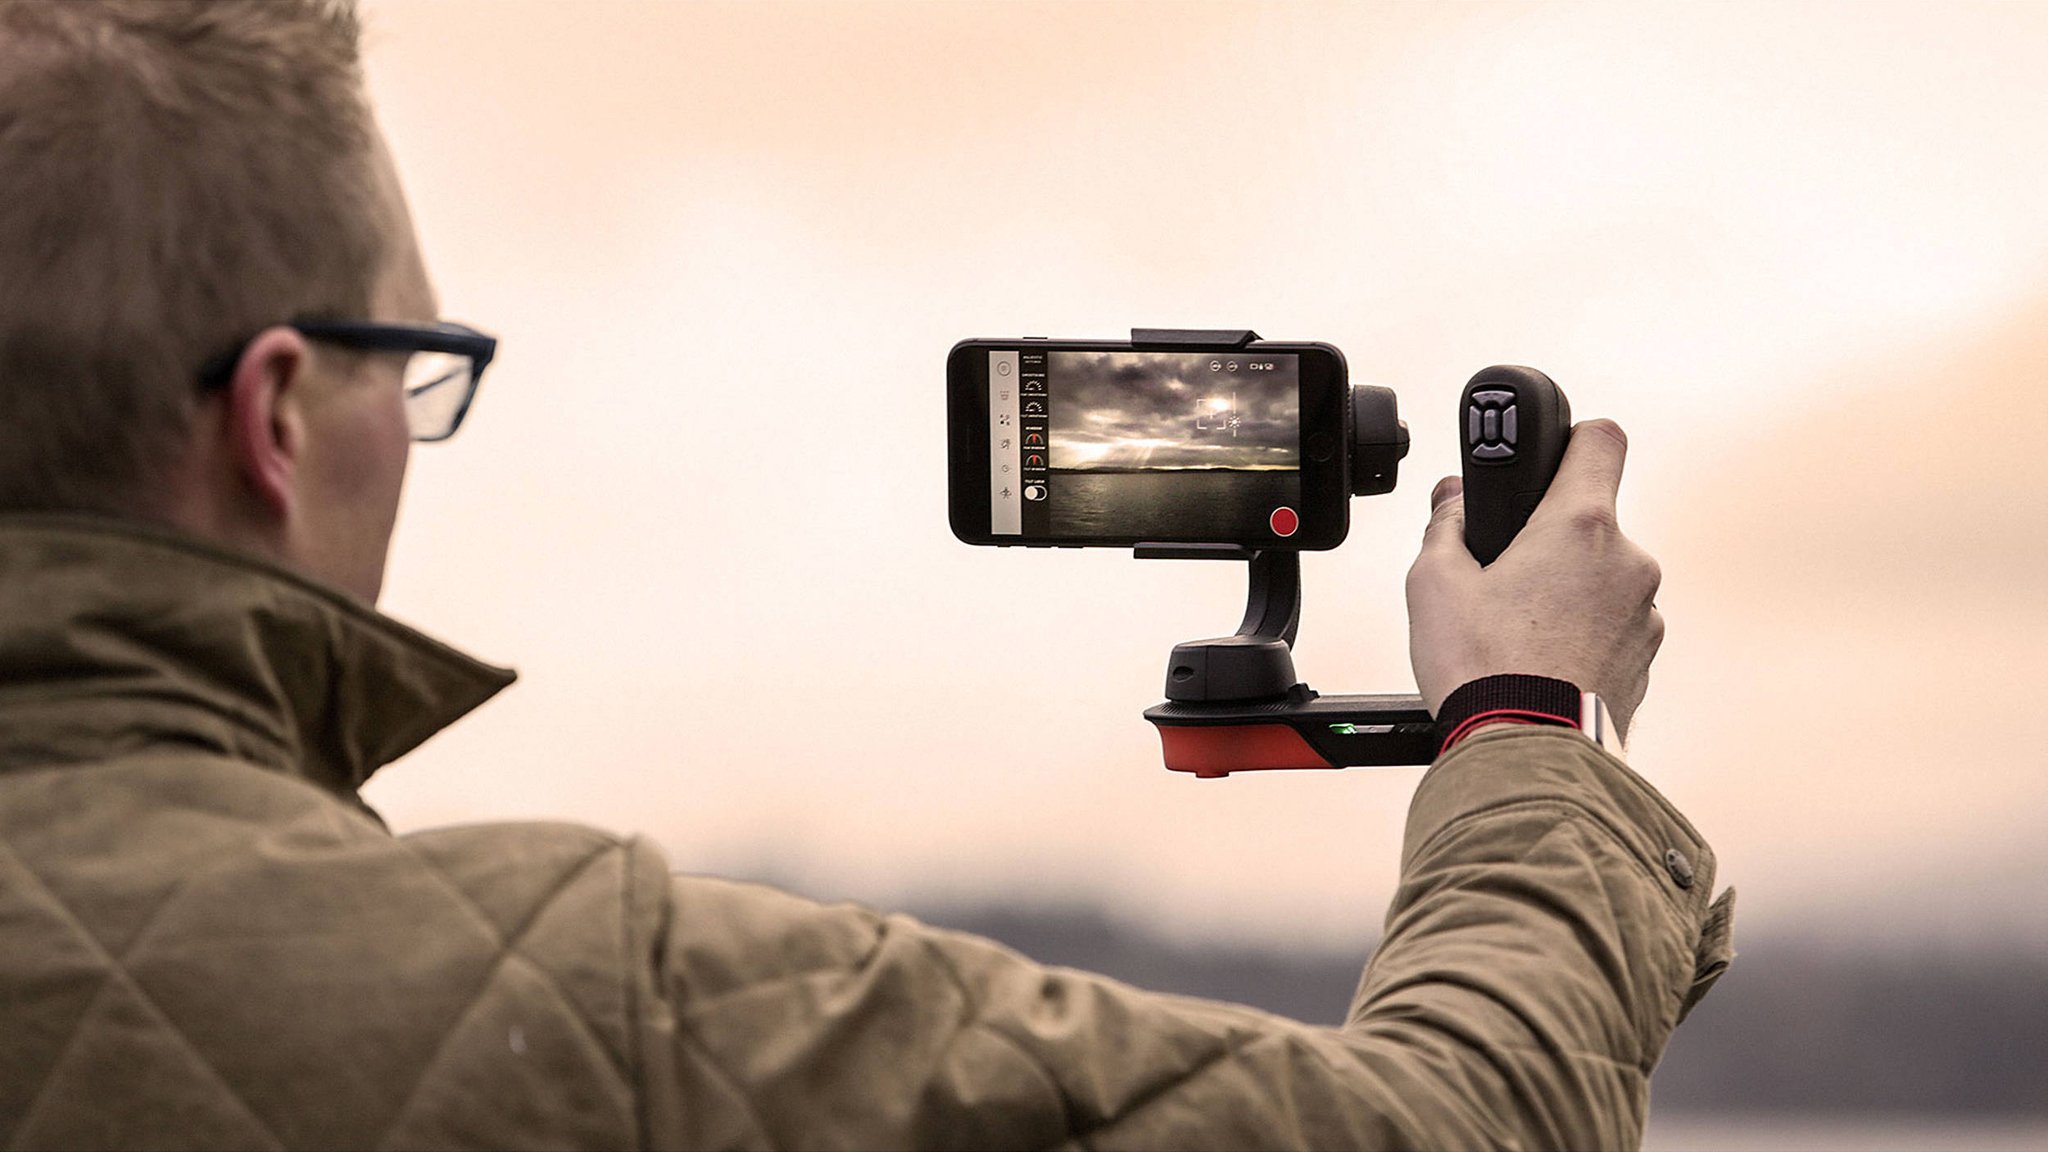 shoot-better-looking-vlogs-with-a-smartphone-gimbal